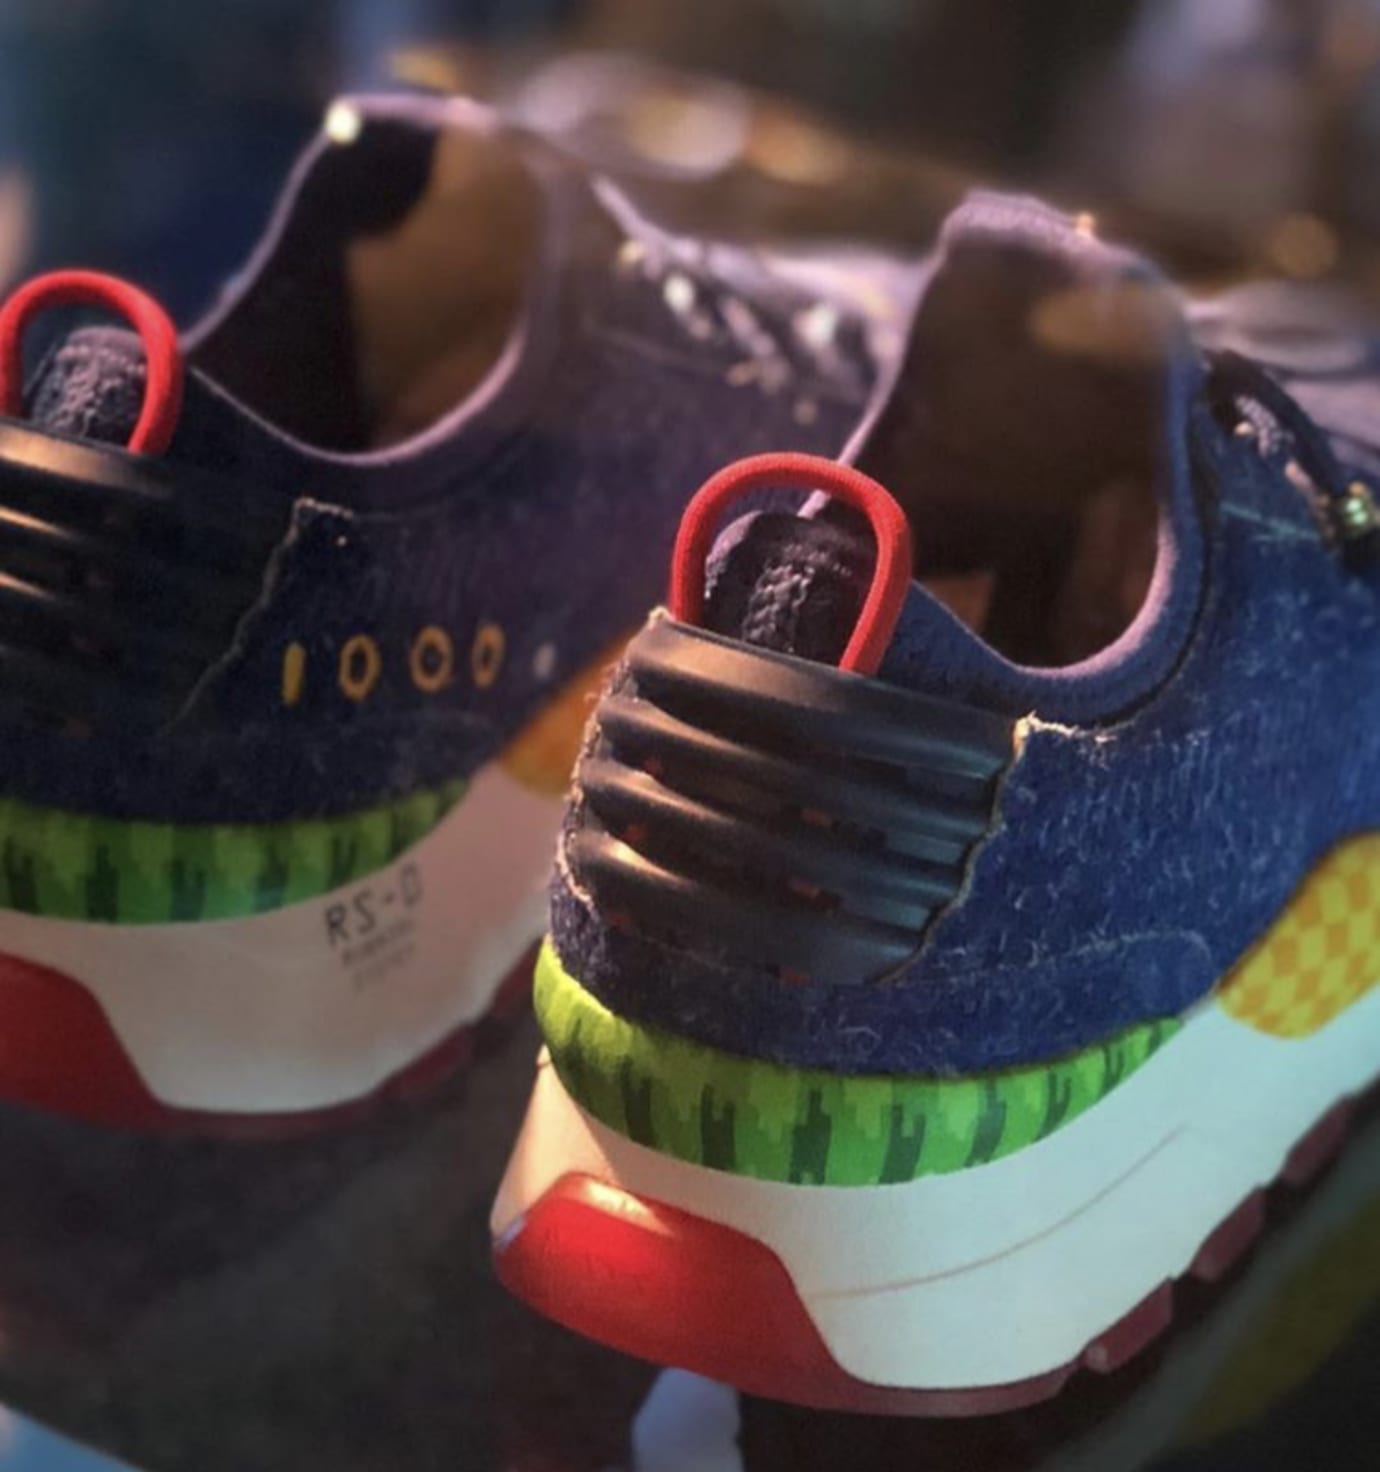 Sonic the Hedgehog x Puma RS-0 Release Date | Sole Collector